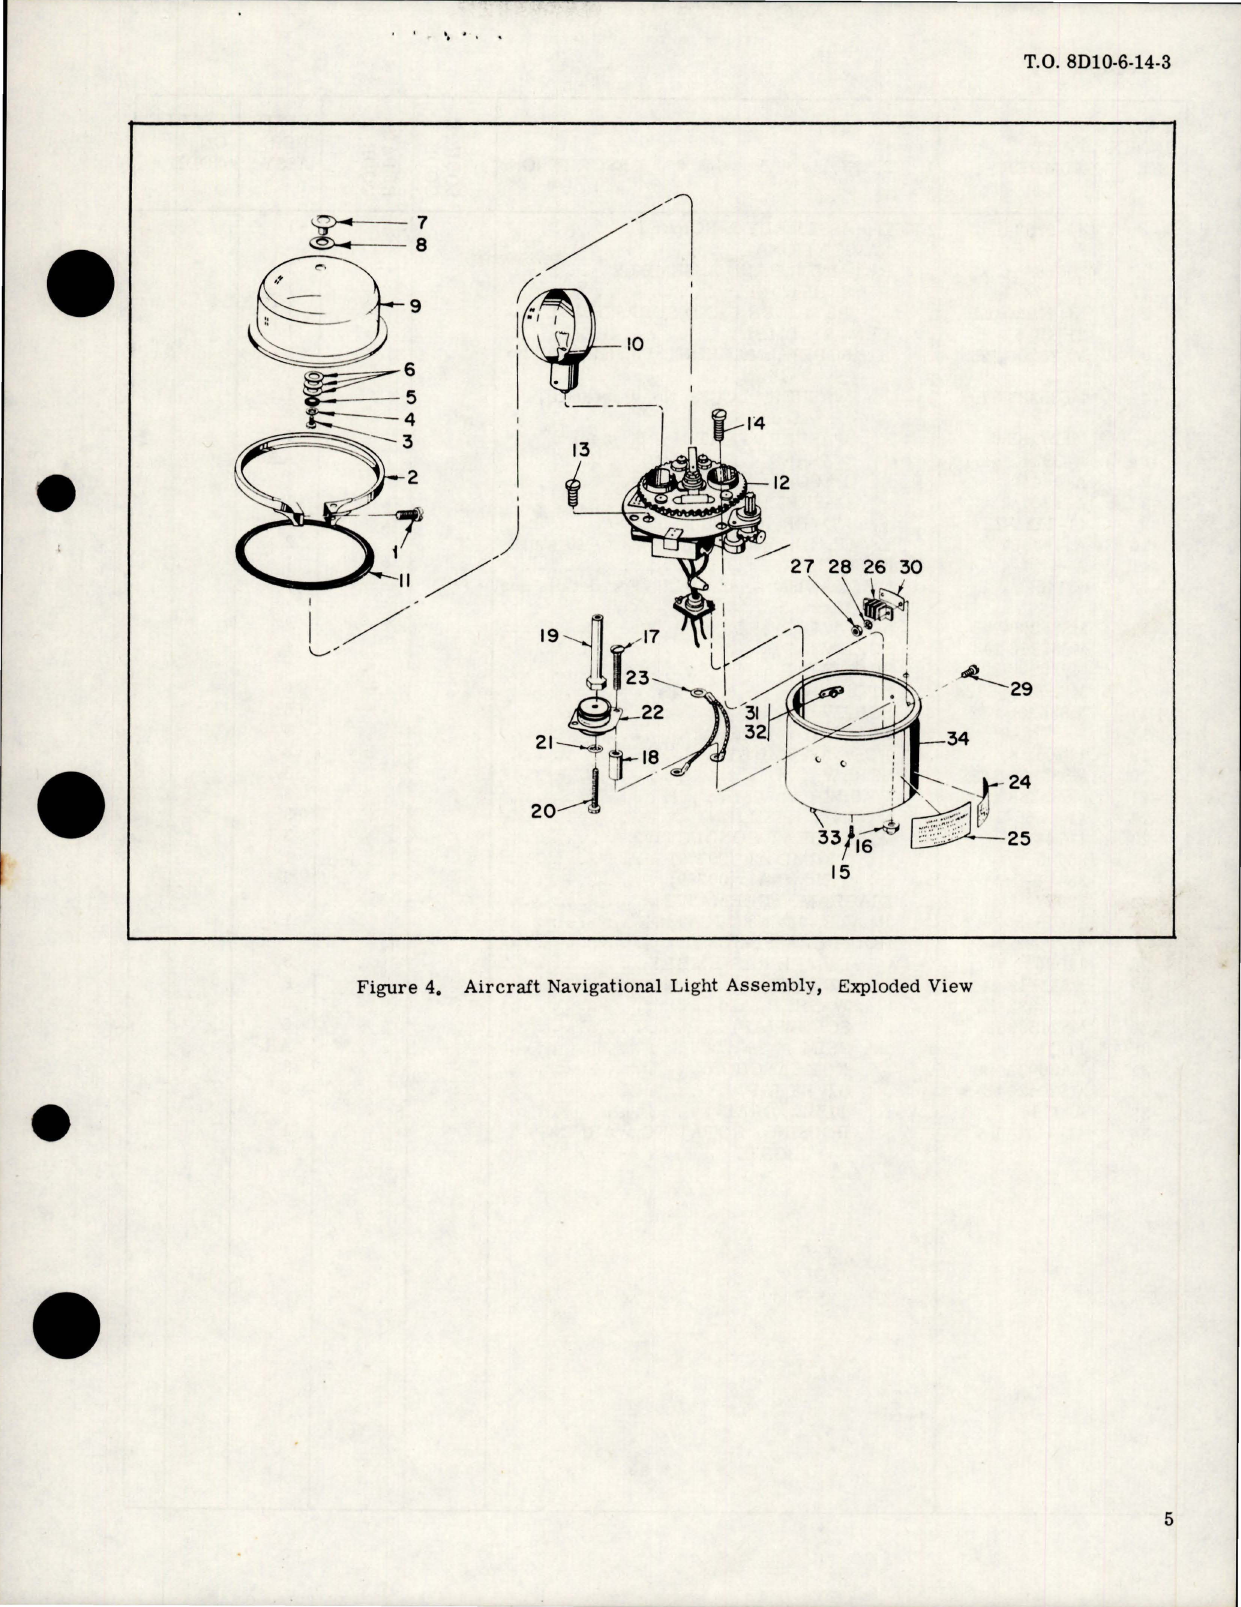 Sample page 5 from AirCorps Library document: Overhaul with Parts Breakdown for Aircraft Navigational Light Assembly - Part 40-0152-1 